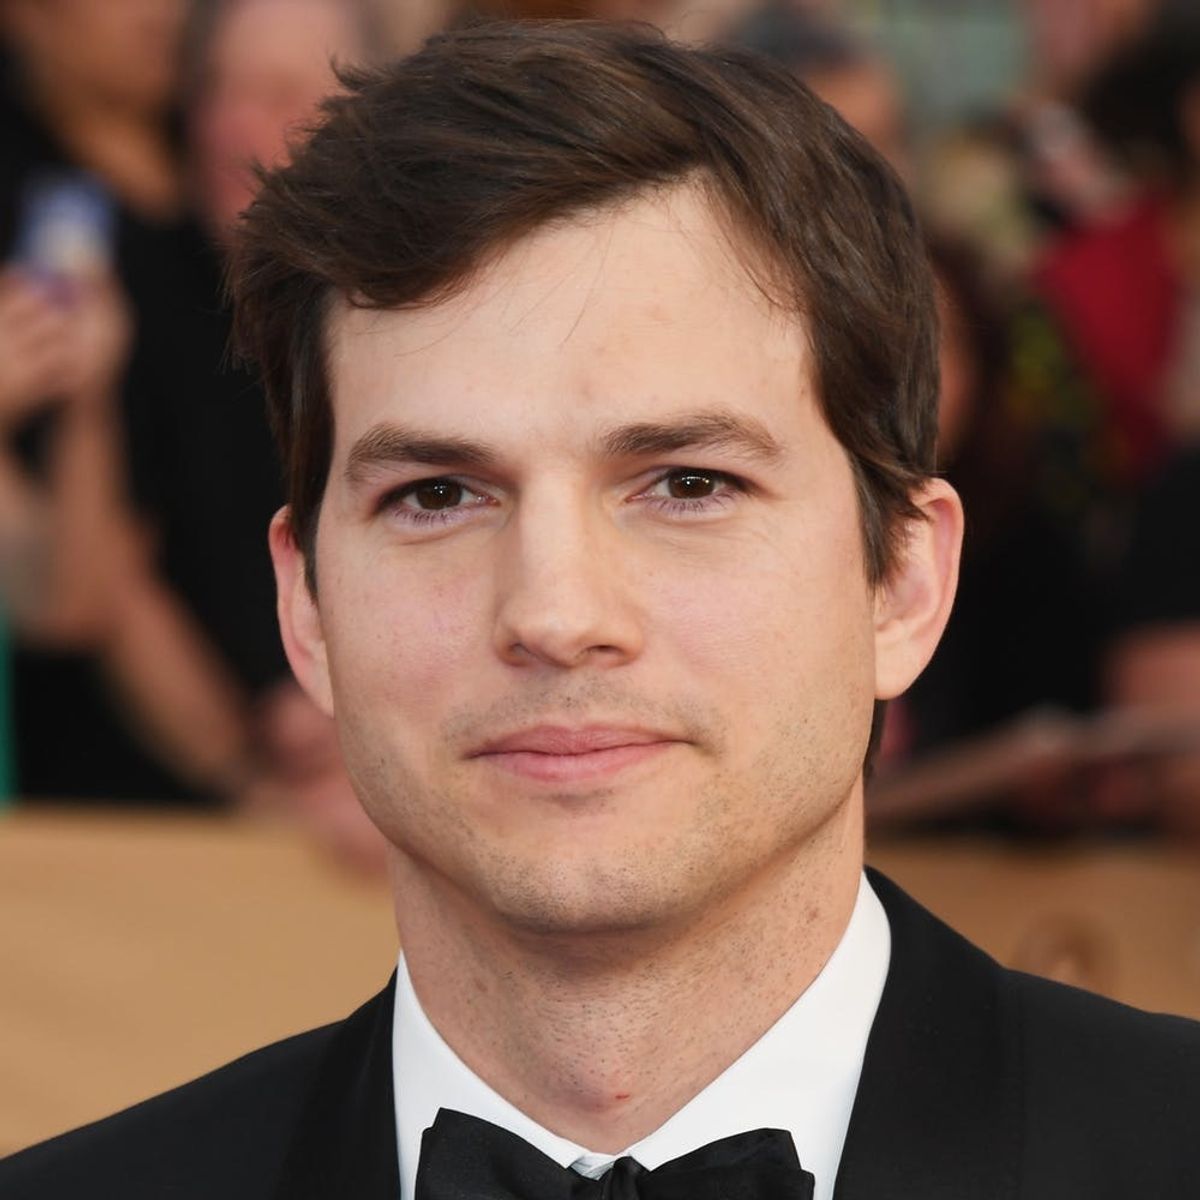 Ashton Kutcher Is Under Fire for Posing These Questions About Women in the Workplace